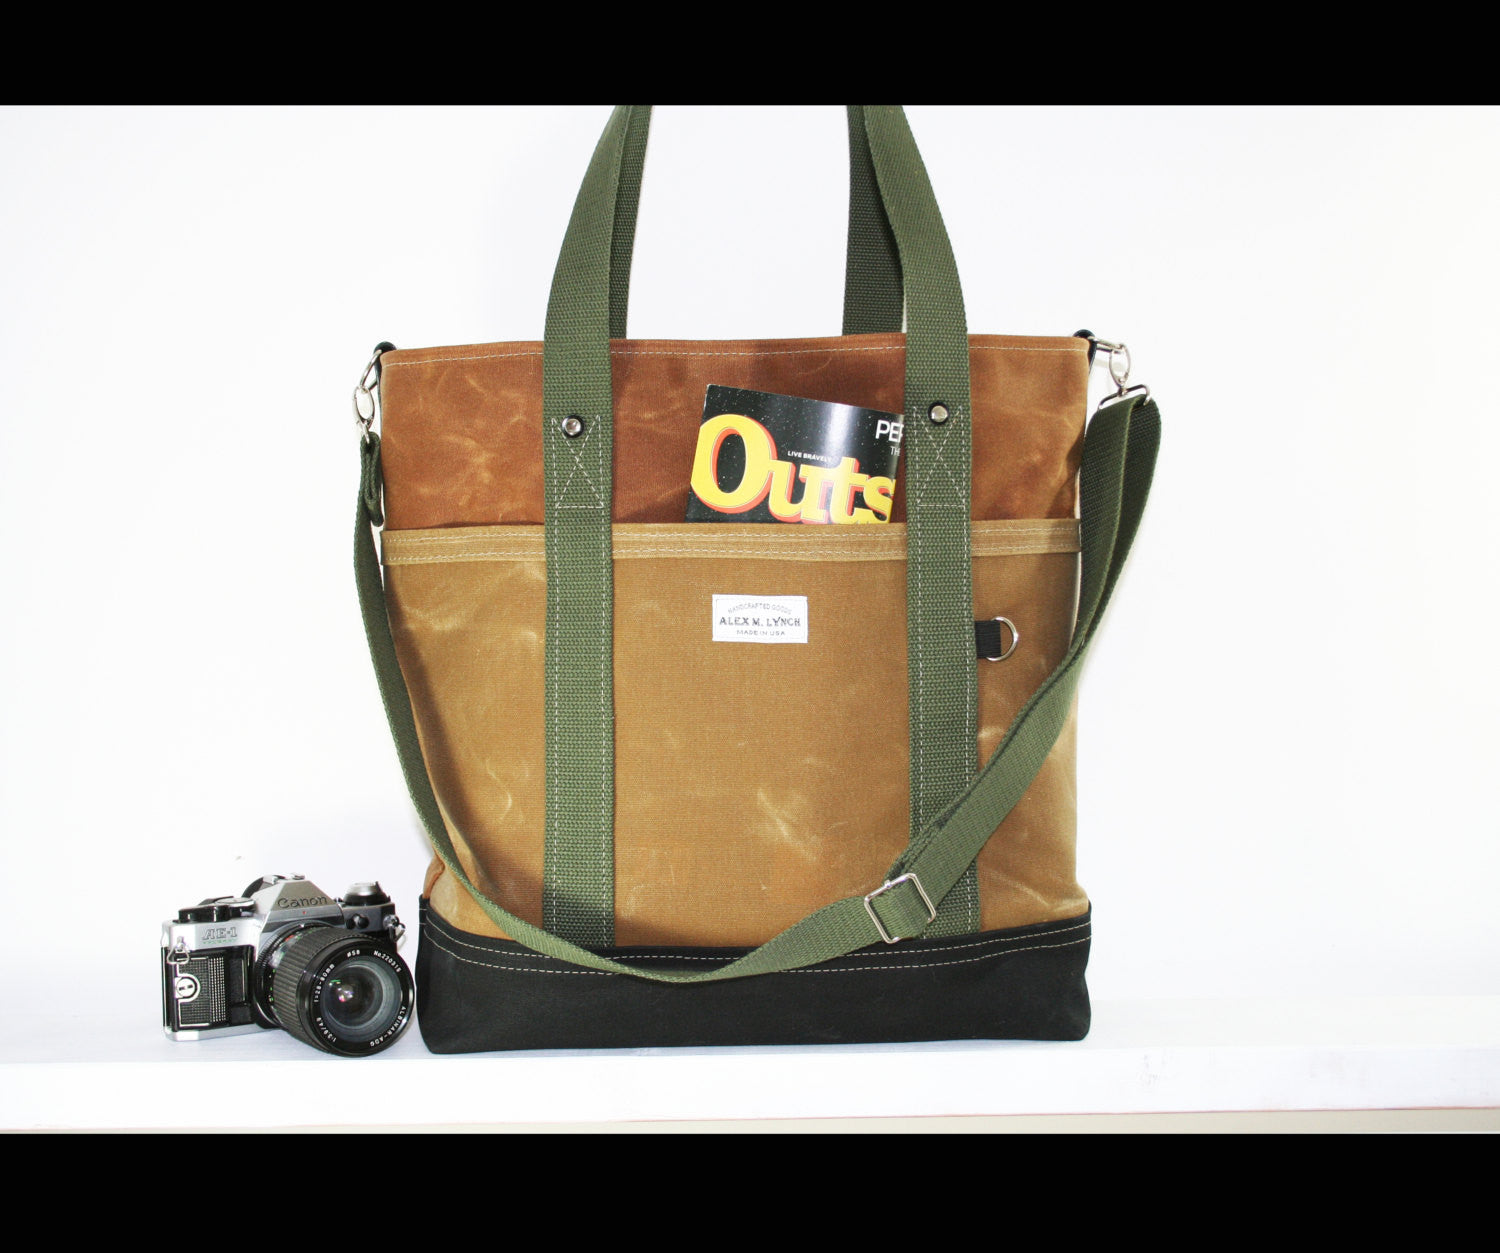 Canvas Tote Bag - Large With Compartments